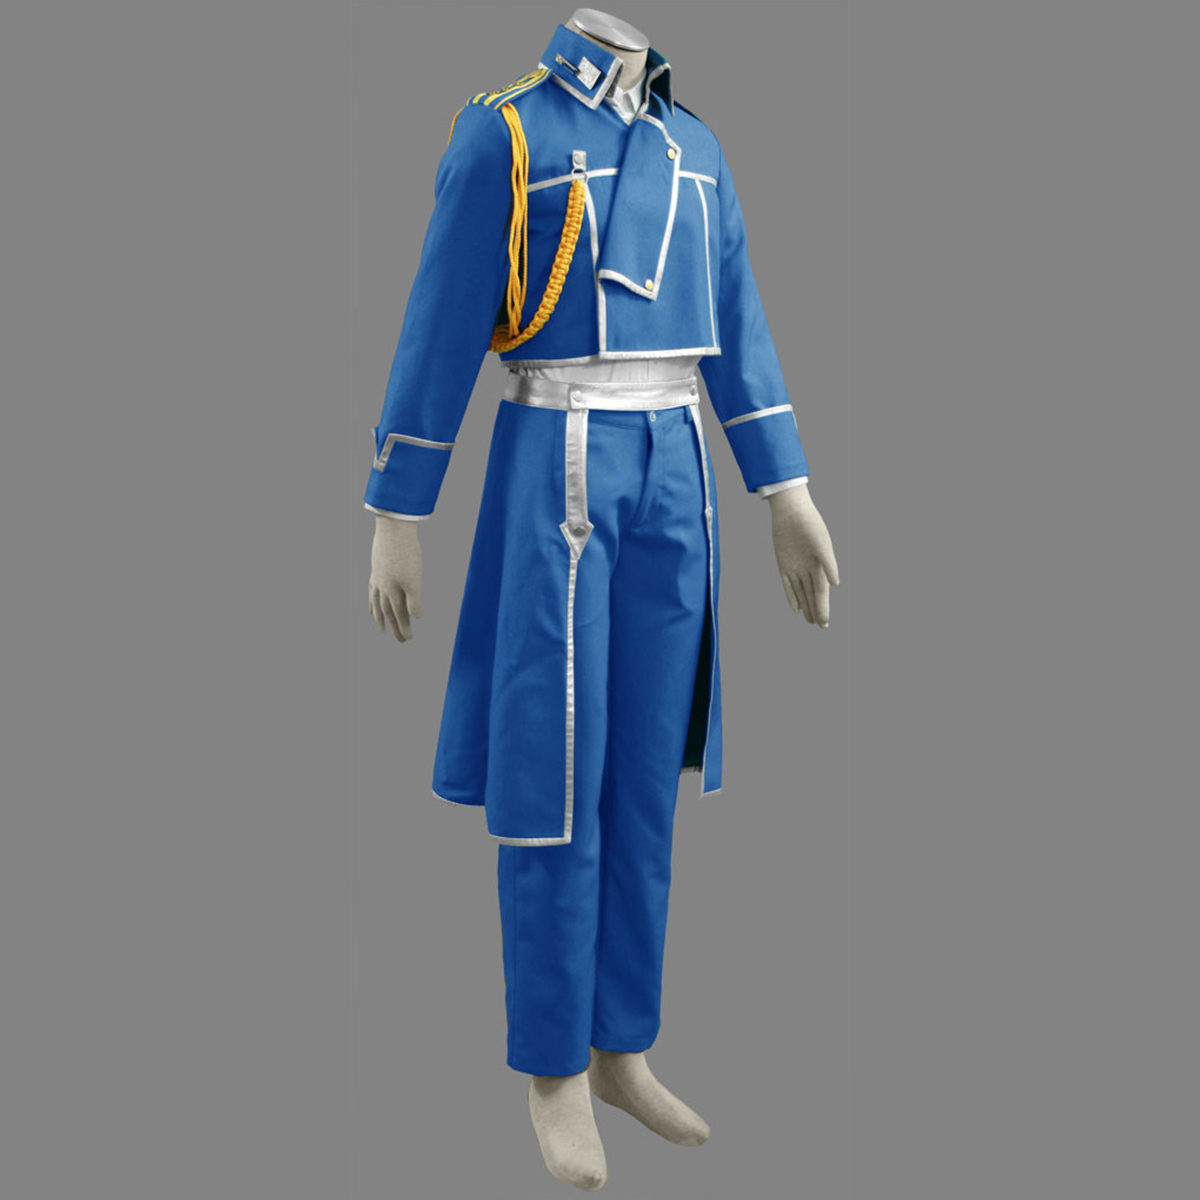 Fullmetal Alchemist Male Military Uniform Anime Cosplay Costumes Outfit